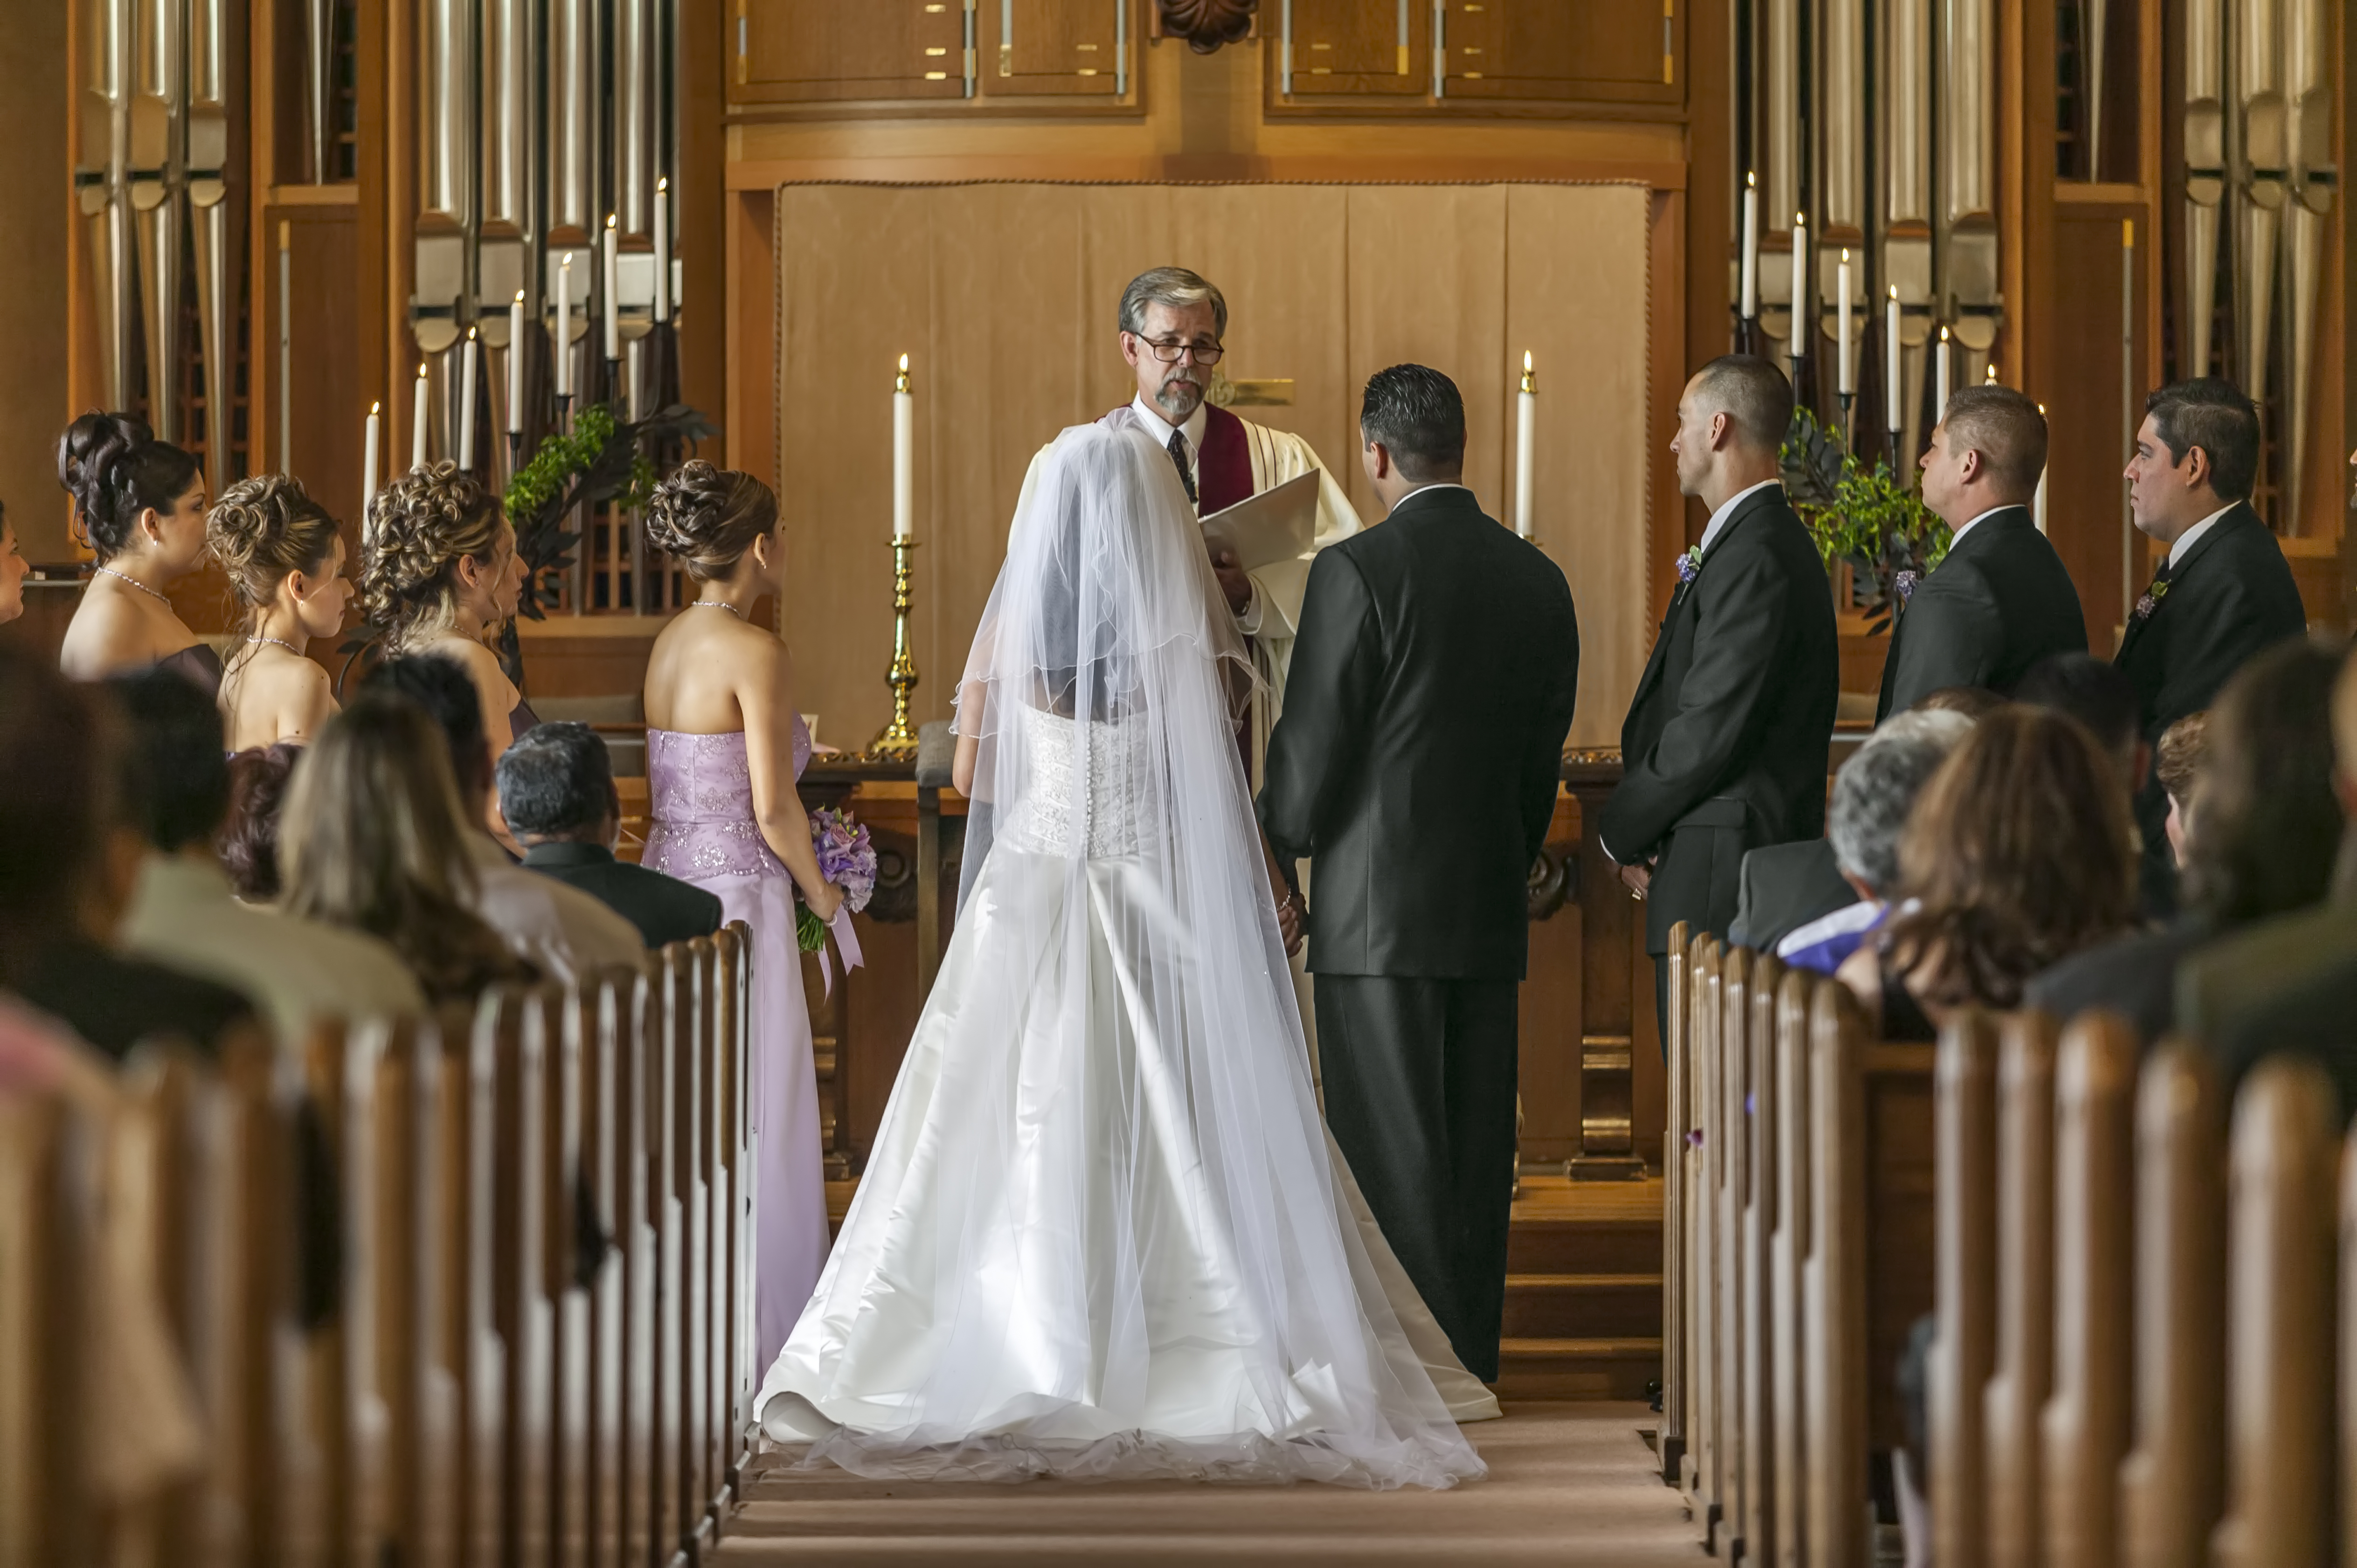 A bride and groom standing at the altar | Source: Getty Images